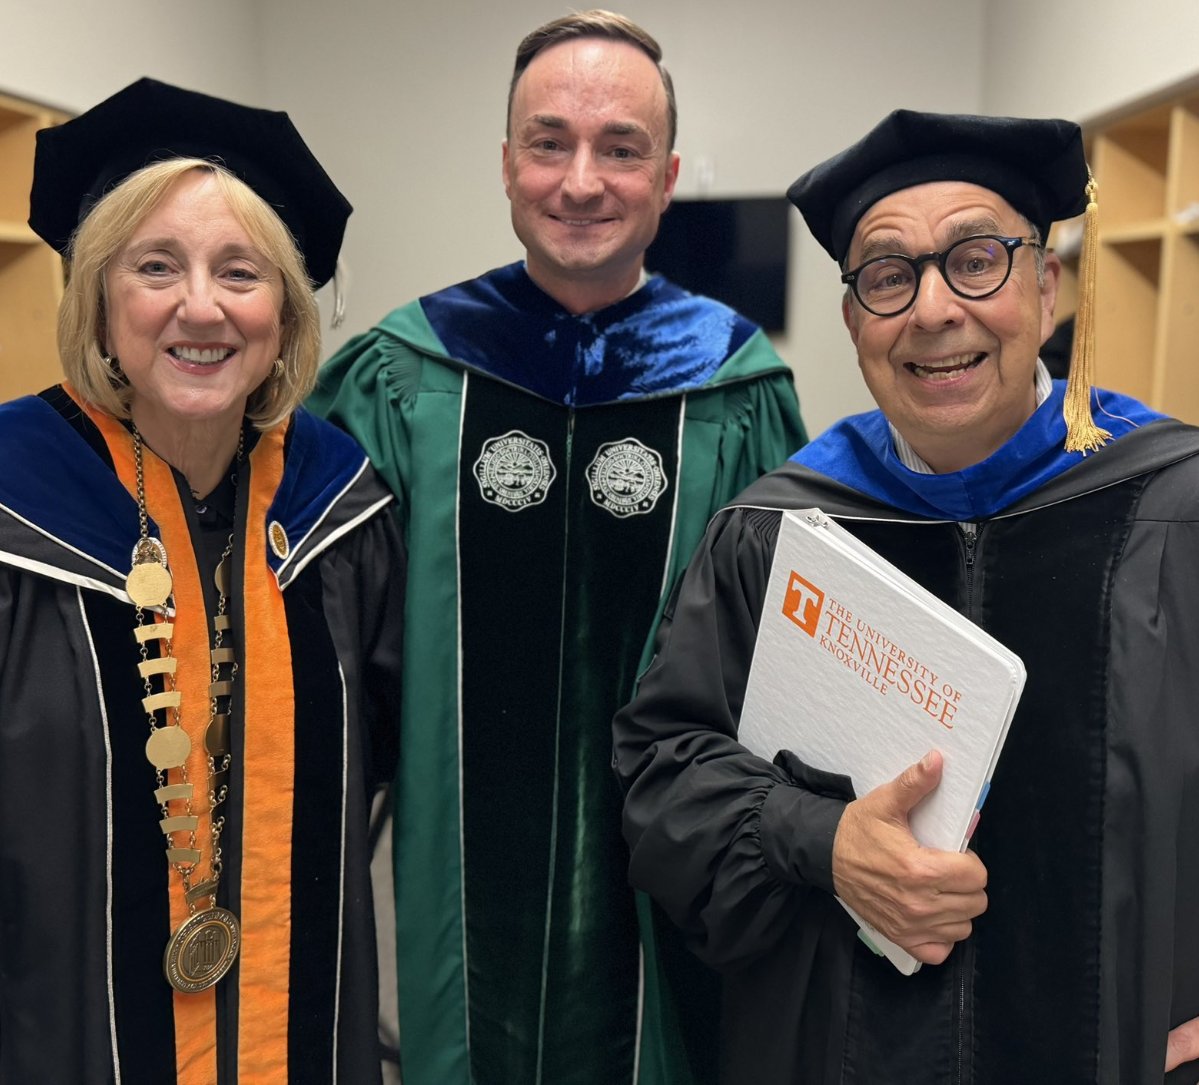 It was quite an honor to deliver the commencement address for the University of Tennessee's College of Communications last night. But now I must return my cap and gown to Hogwarts...